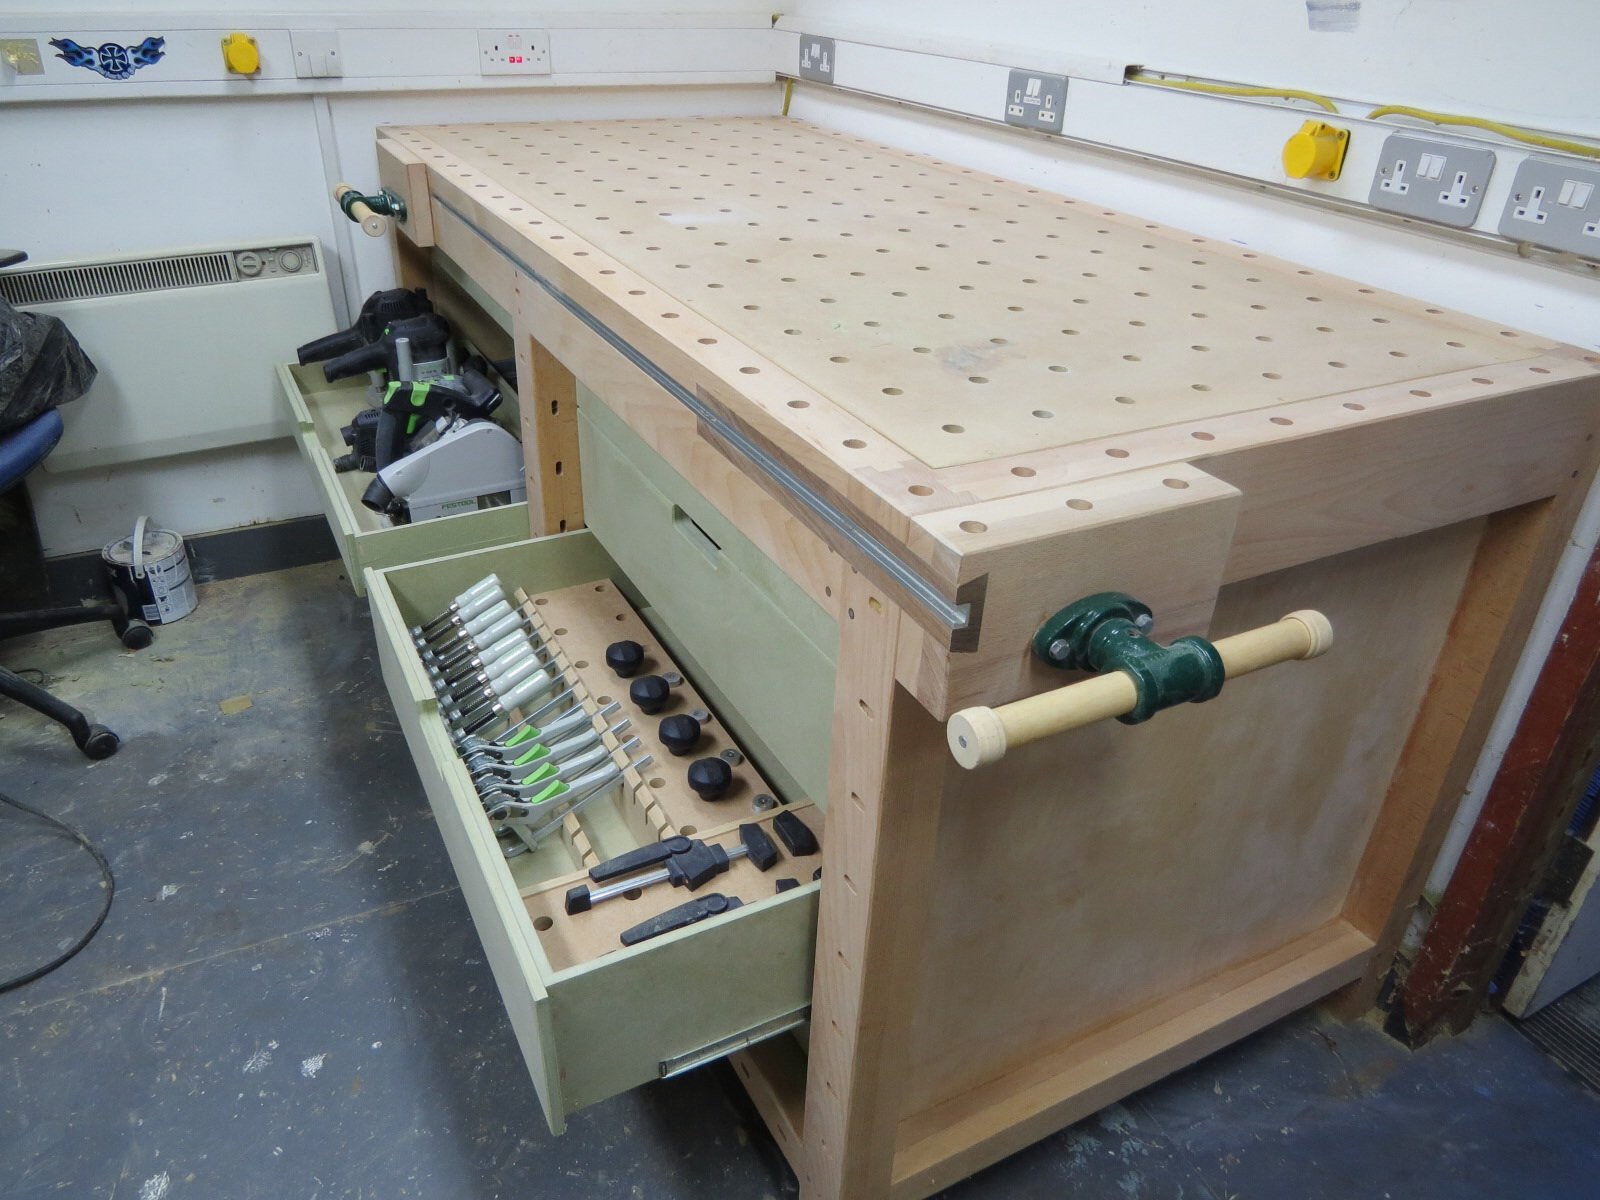 Workbenches With a Difference - Table Saw Central